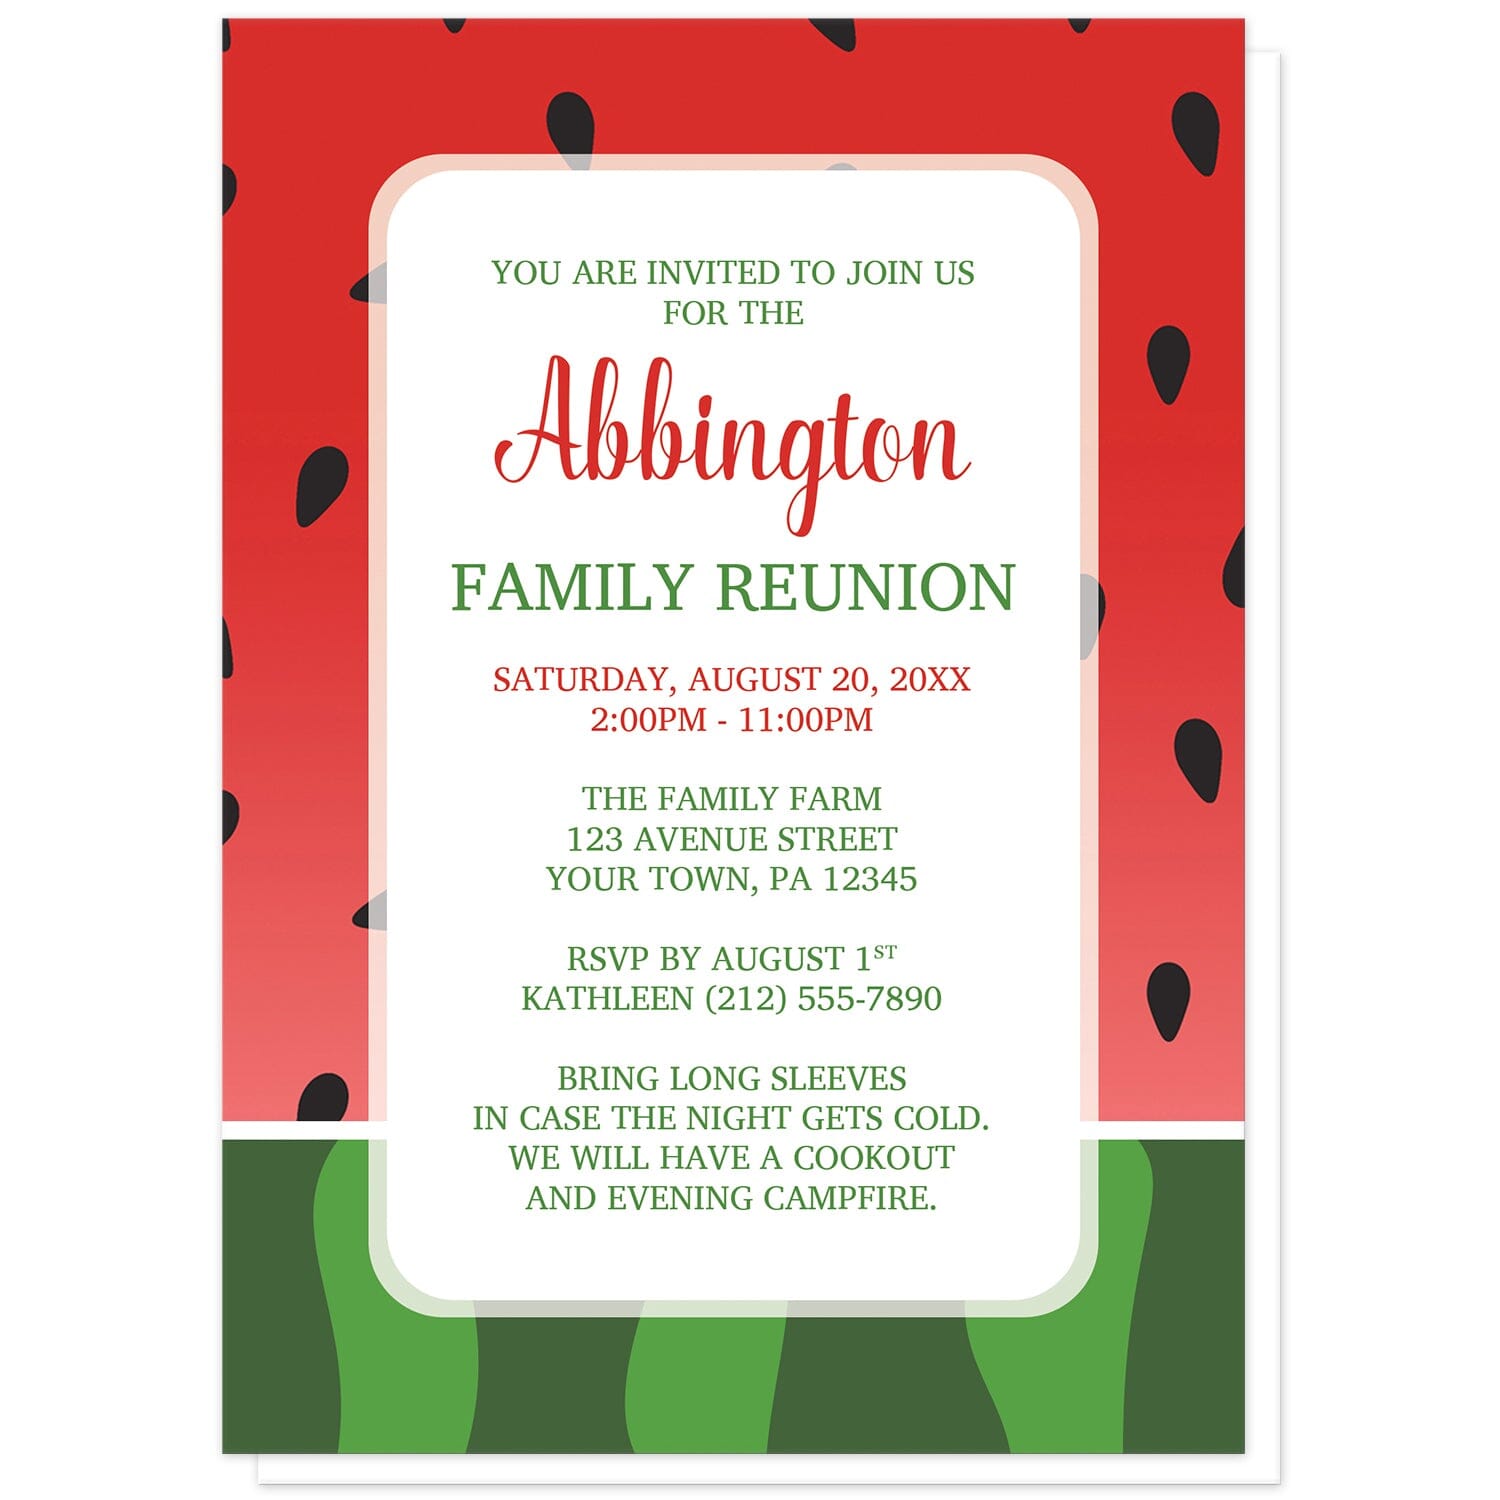 Red and Green Watermelon Family Reunion Invitations at Artistically Invited. Red and green watermelon family reunion invitations designed with a yummy-looking watermelon background design. Your personalized family reunion celebration details are custom printed in red and green over white centered in the middle of the invitations over the background illustration.